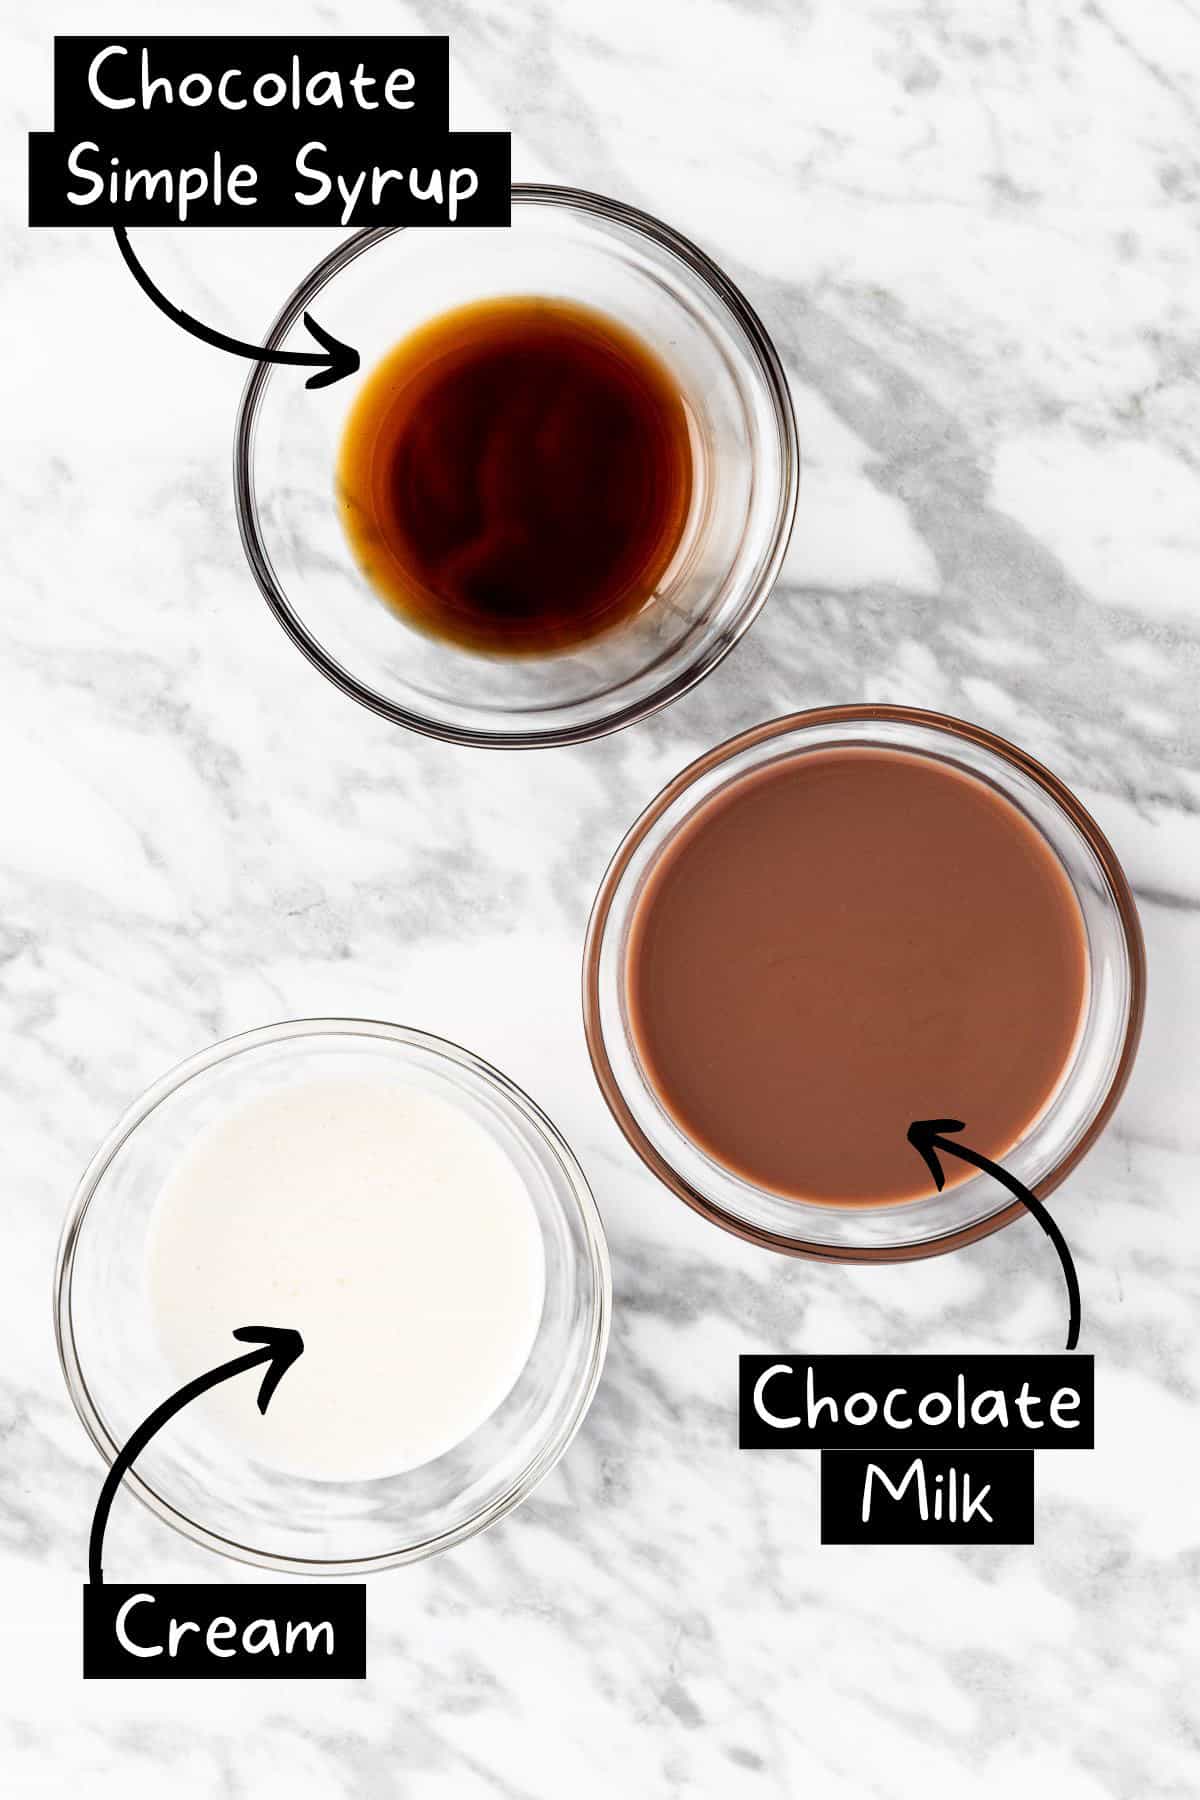 The ingredients needed to make the Starbucks chocolate foam.